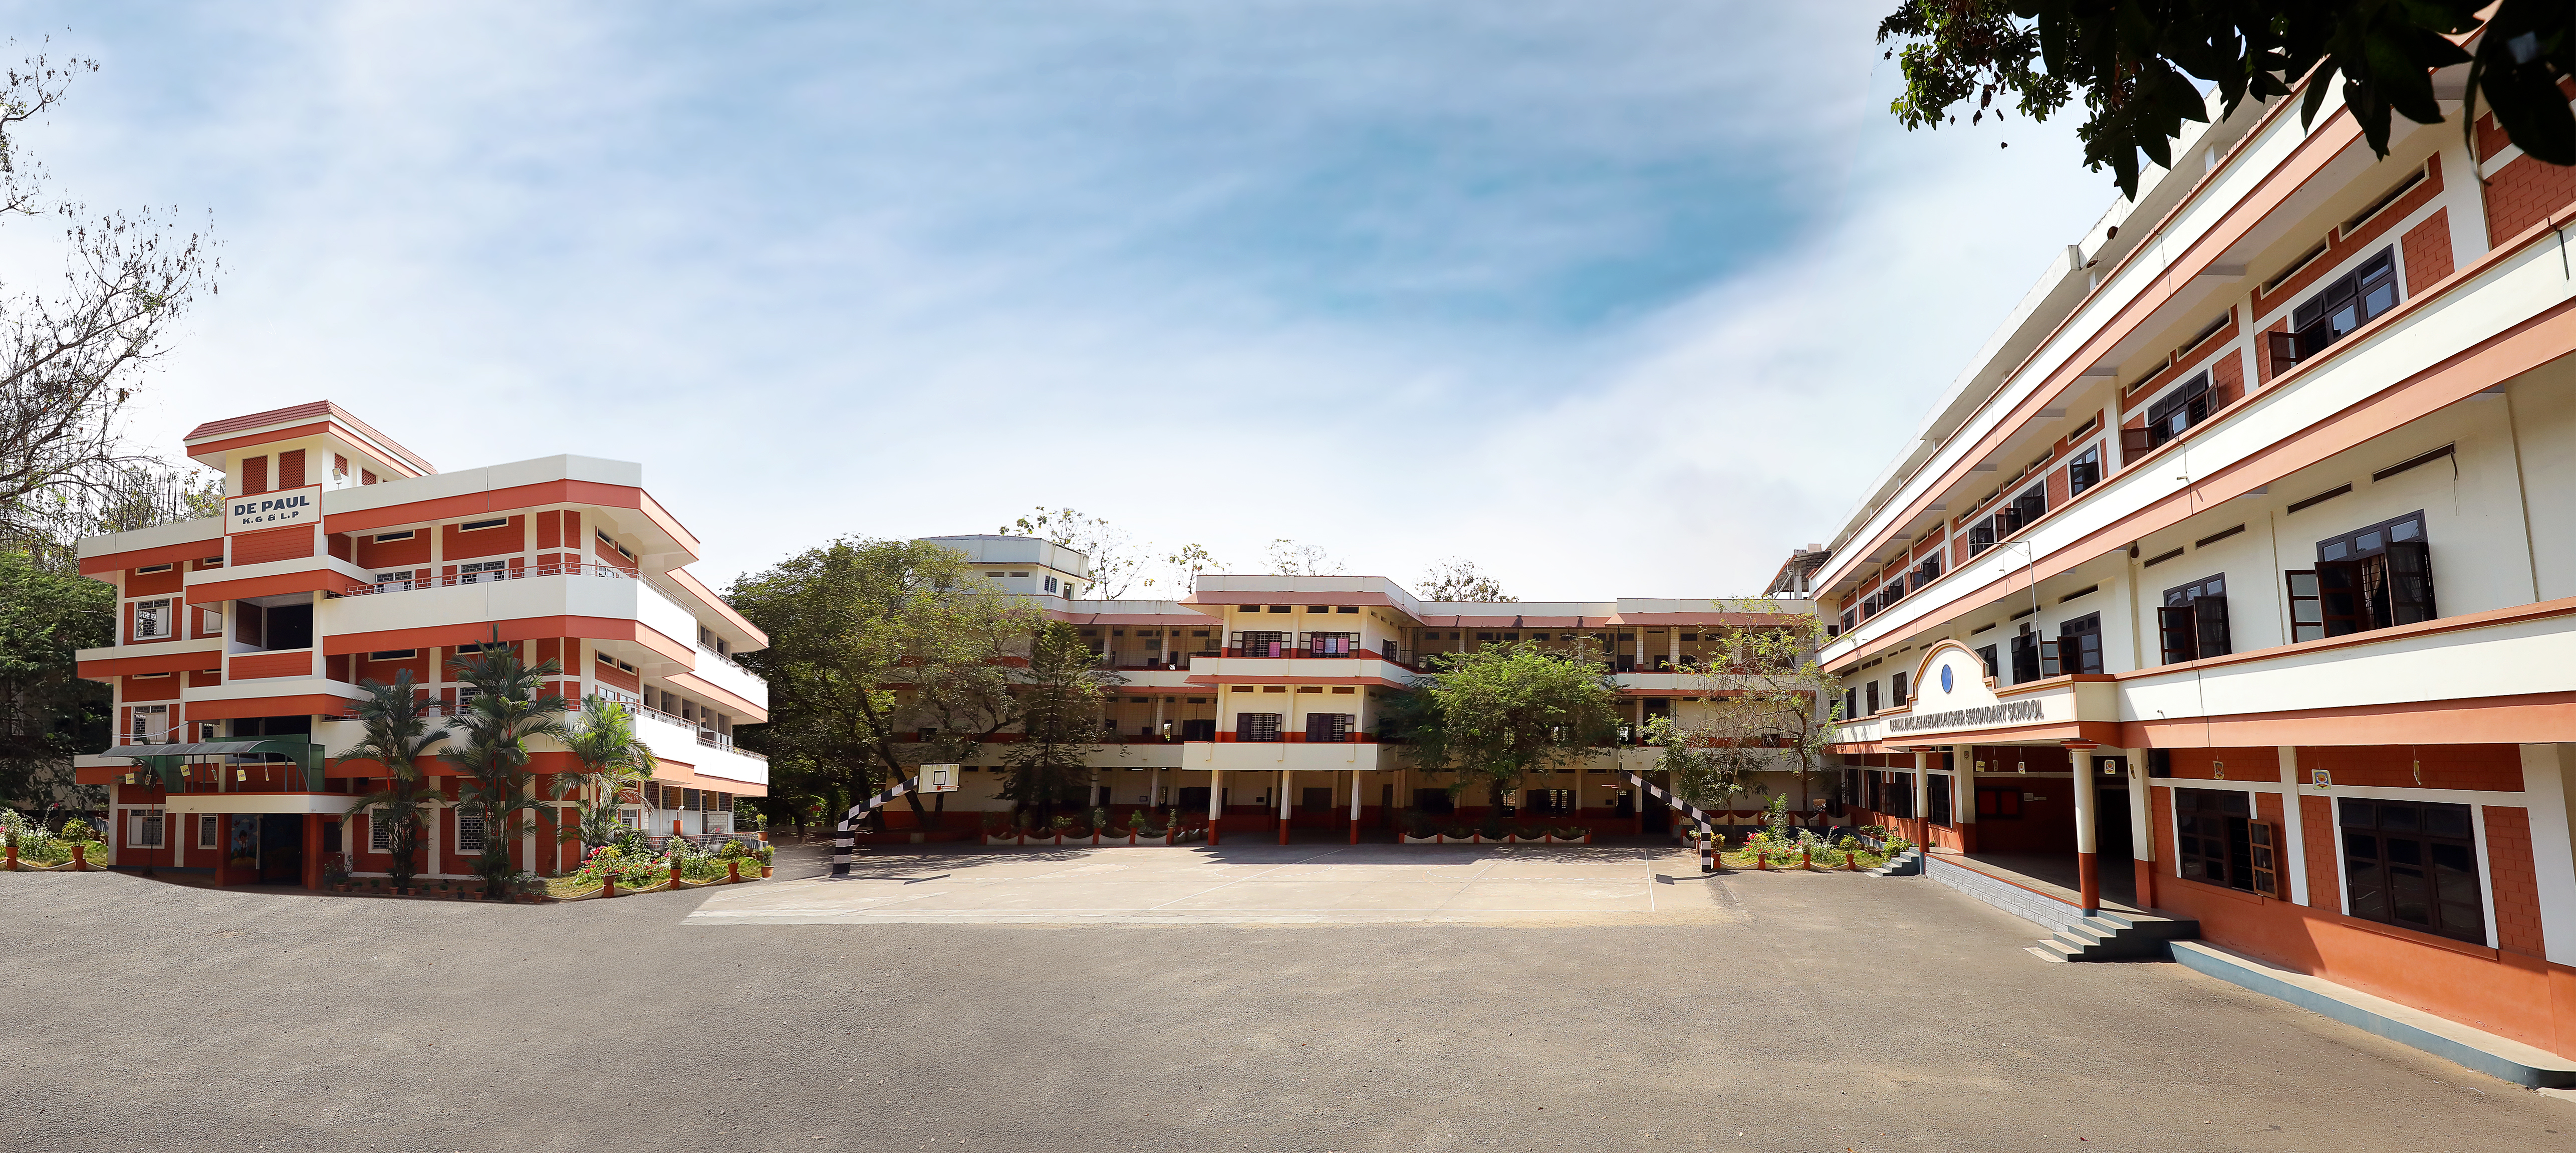 Depaul E M H S S Angamaly - School Building